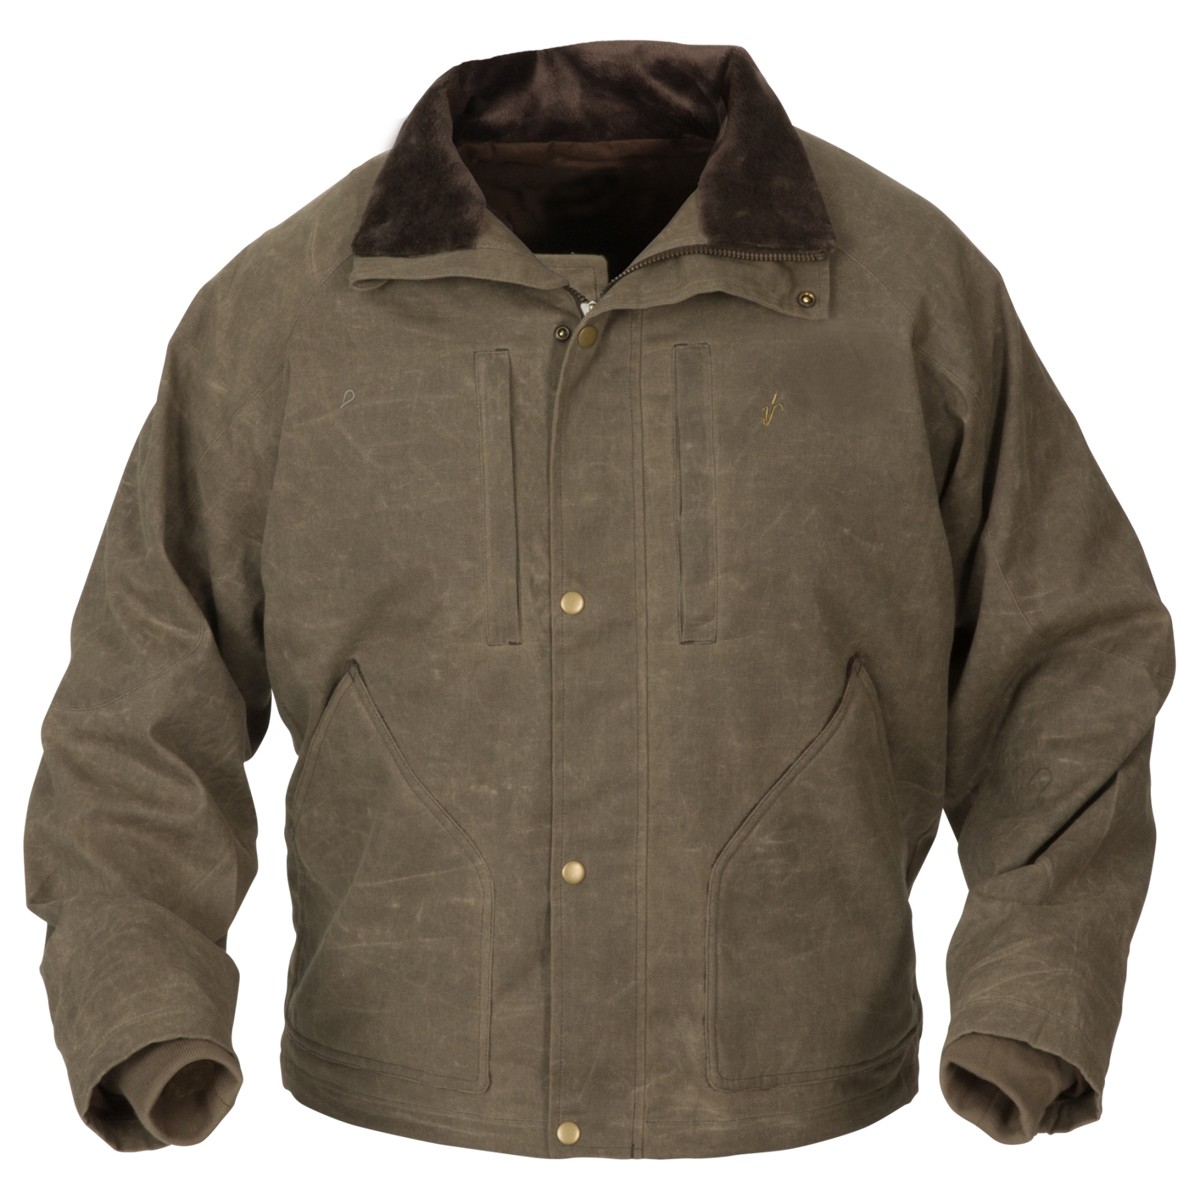 Avery Heritage Field Jacket Marsh Brown Extra Large Tall - image 1 of 2